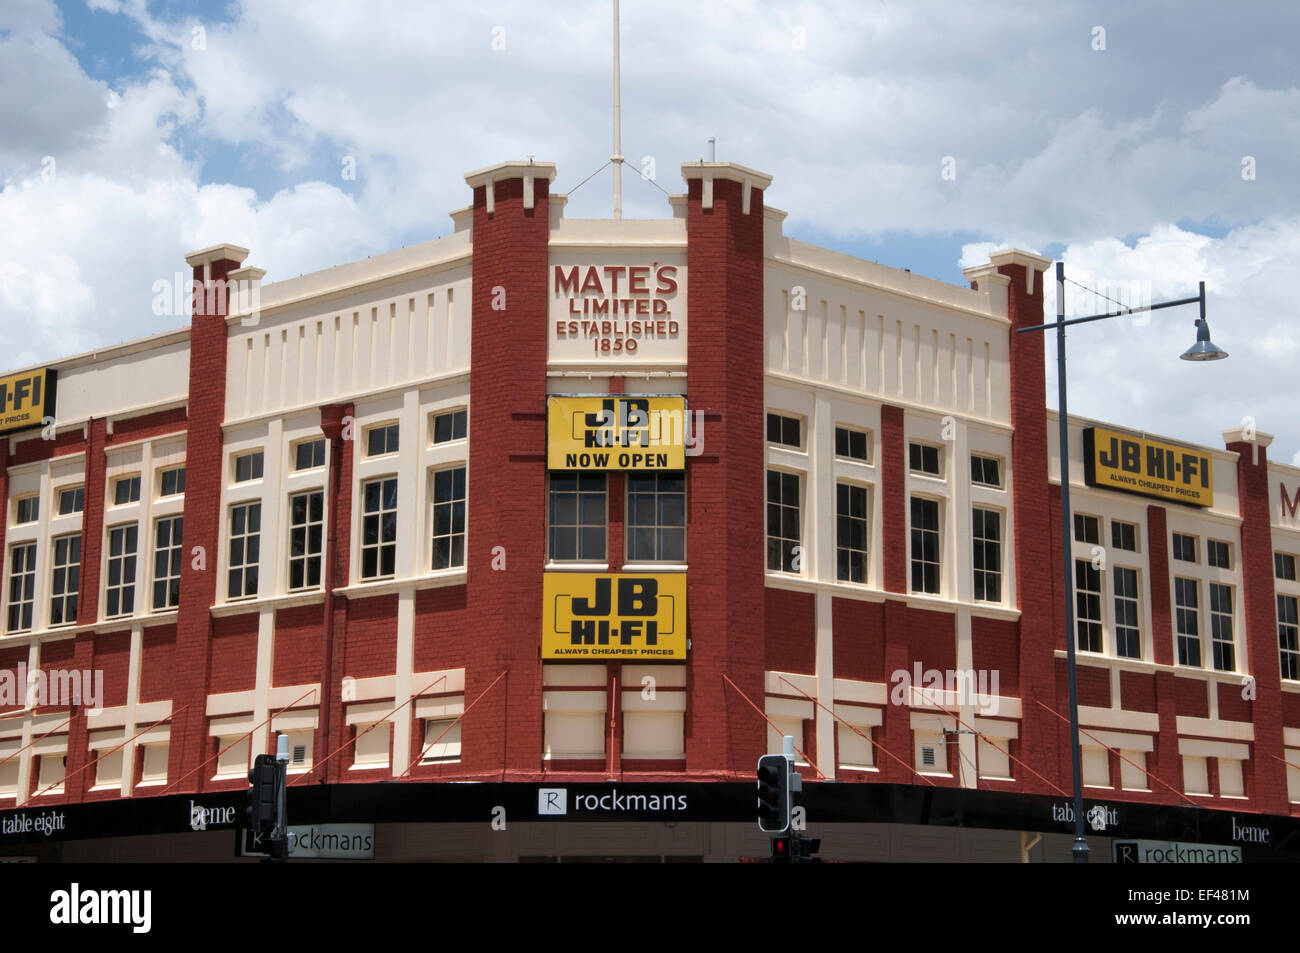 Hume Highway road trip, Australia: Mate's Building in Albury, New South Wales Stock Photo